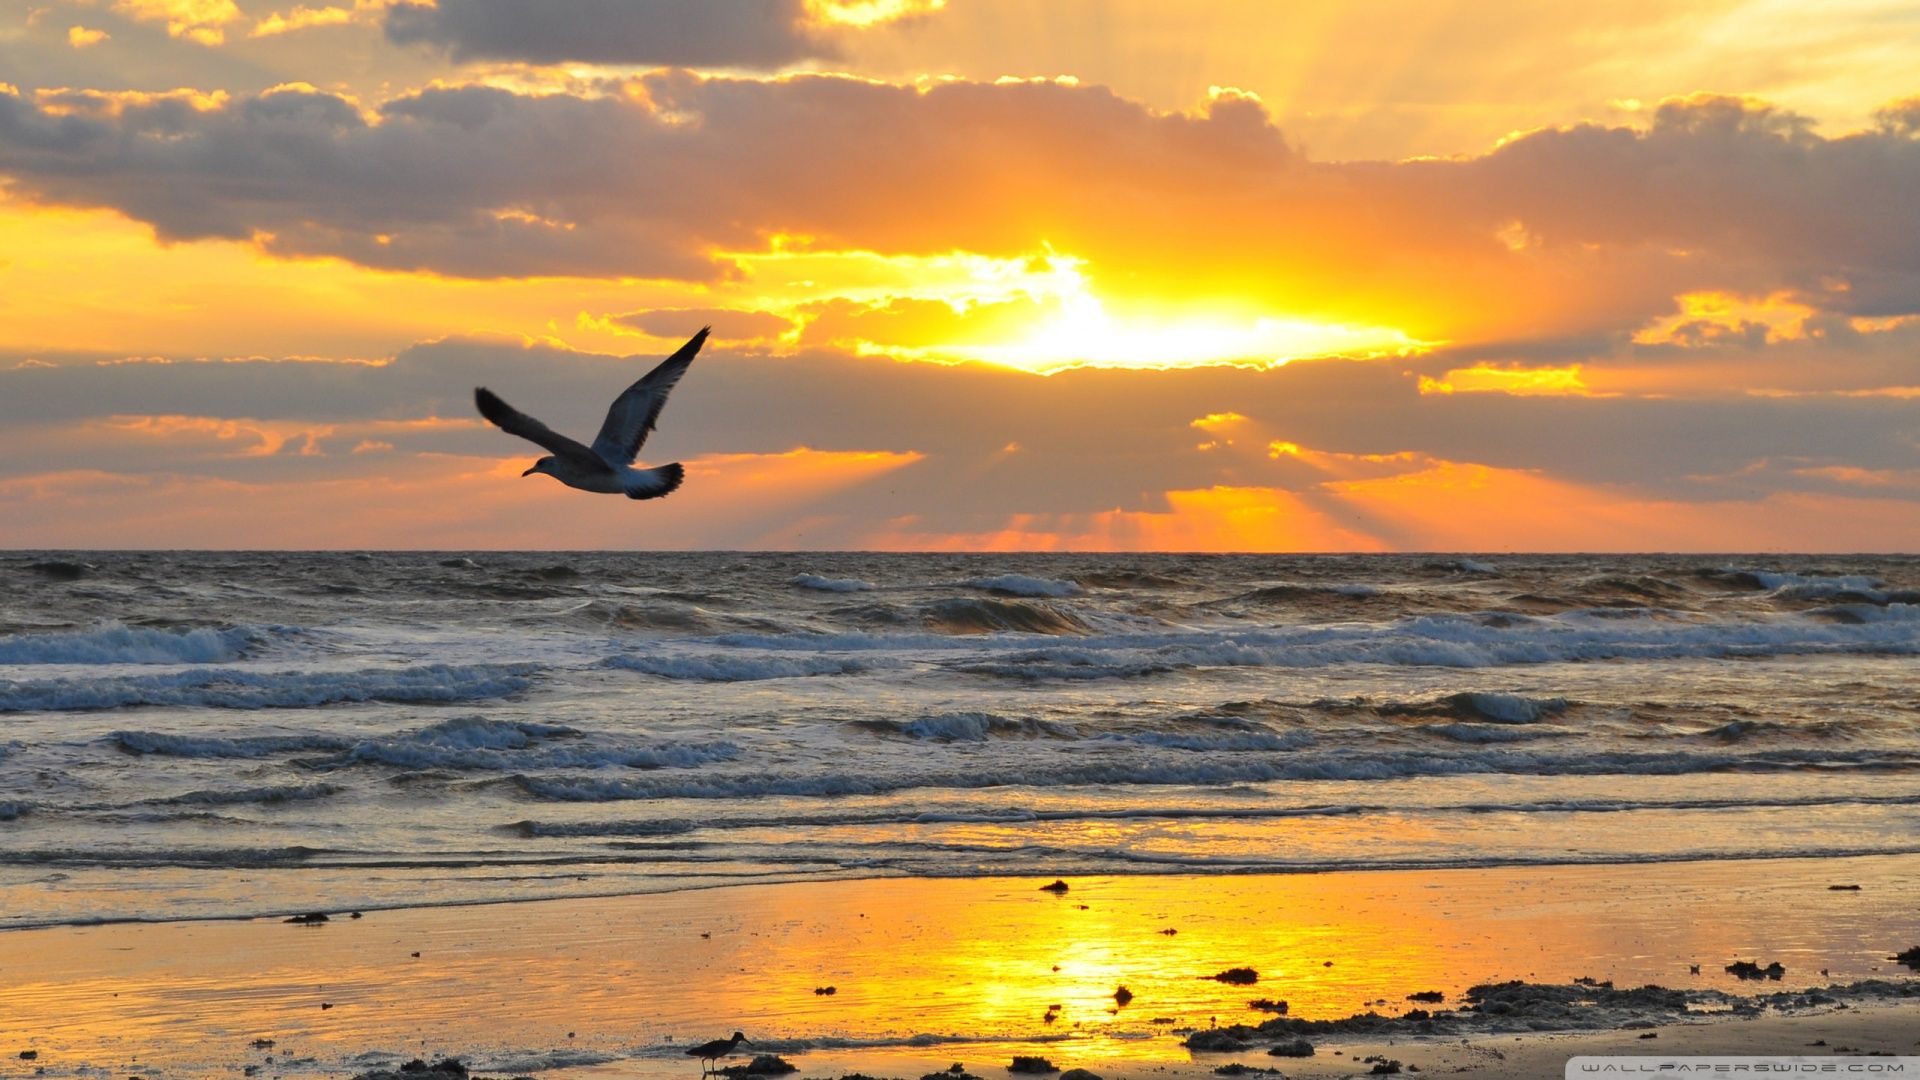 Download Flying Seagull At Sunrise Wallpaper 1920x1080